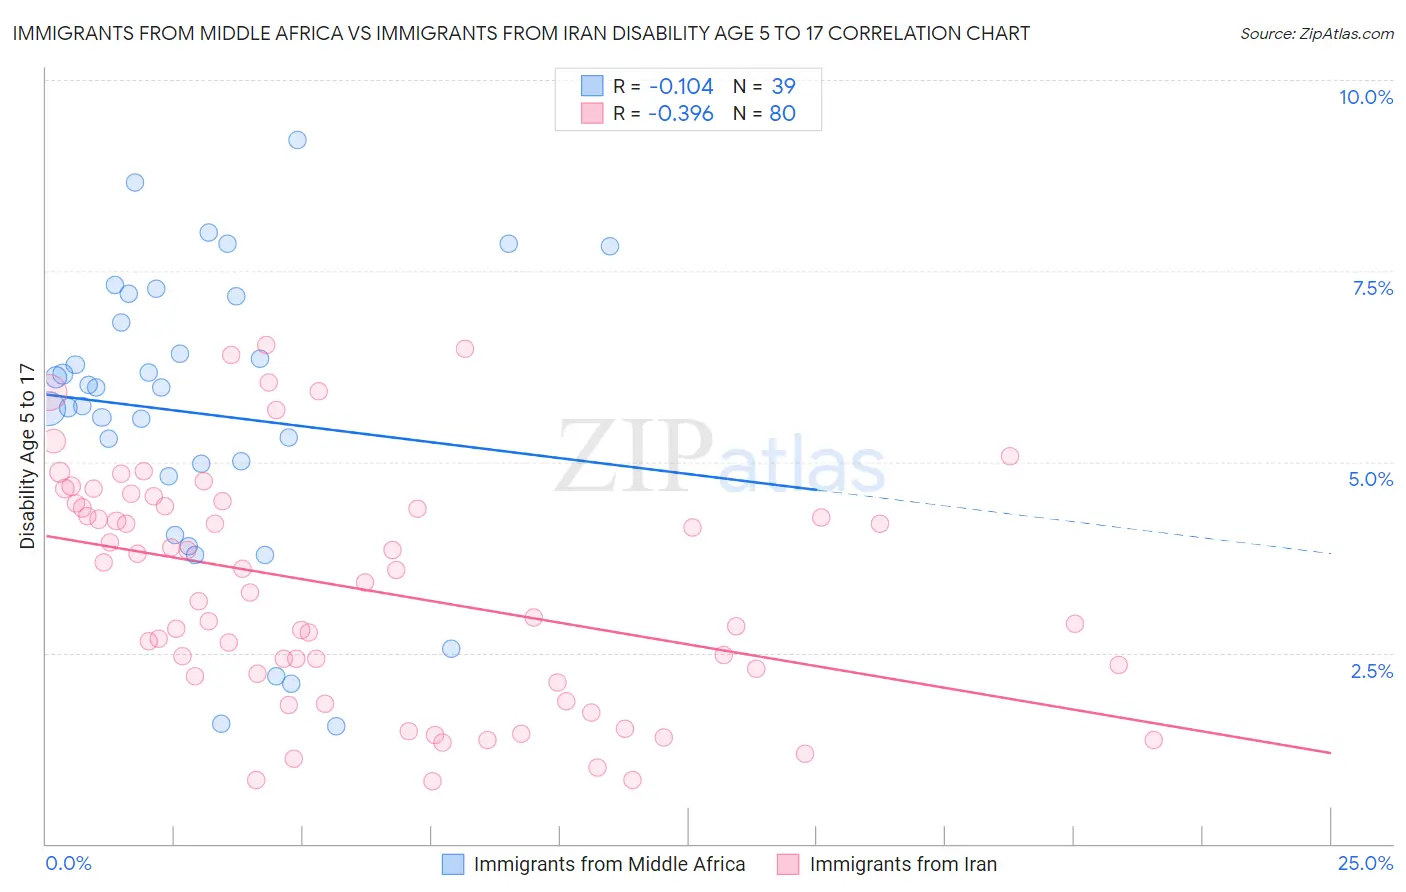 Immigrants from Middle Africa vs Immigrants from Iran Disability Age 5 to 17